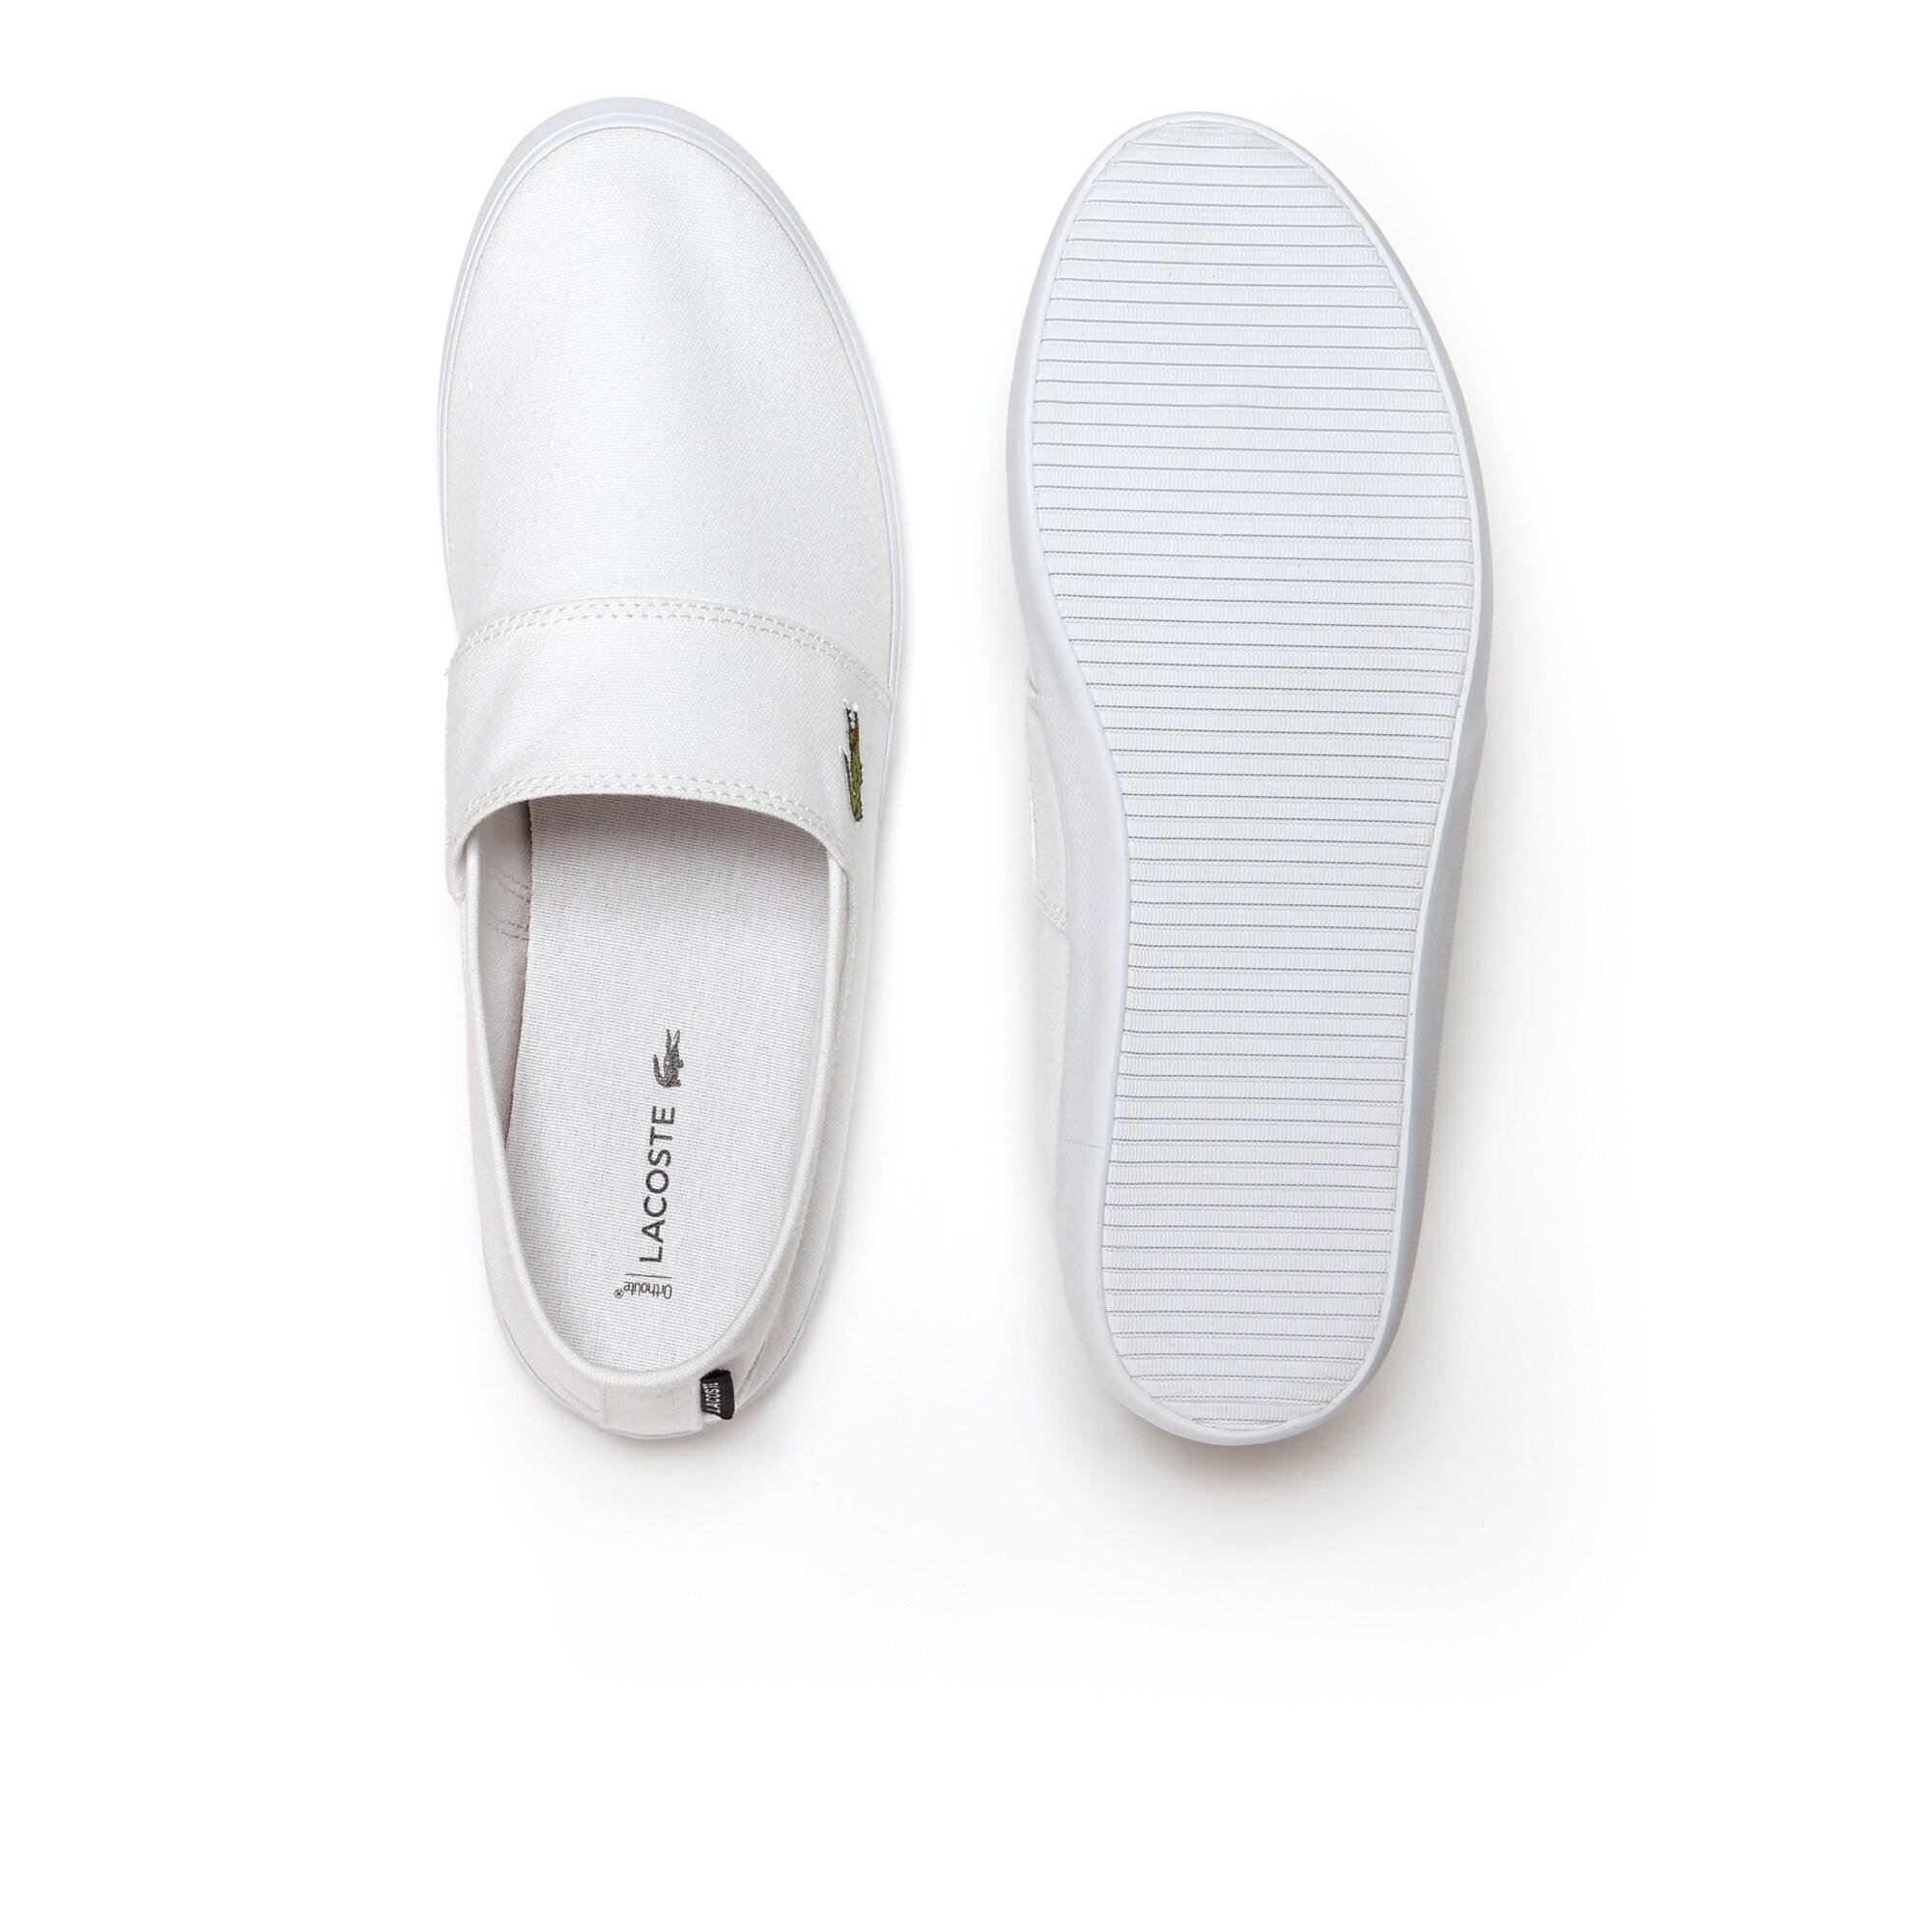 Lacoste Men's shoes slip-on Graduate from leather Premium 733CAM1071 001 |  Lacoste